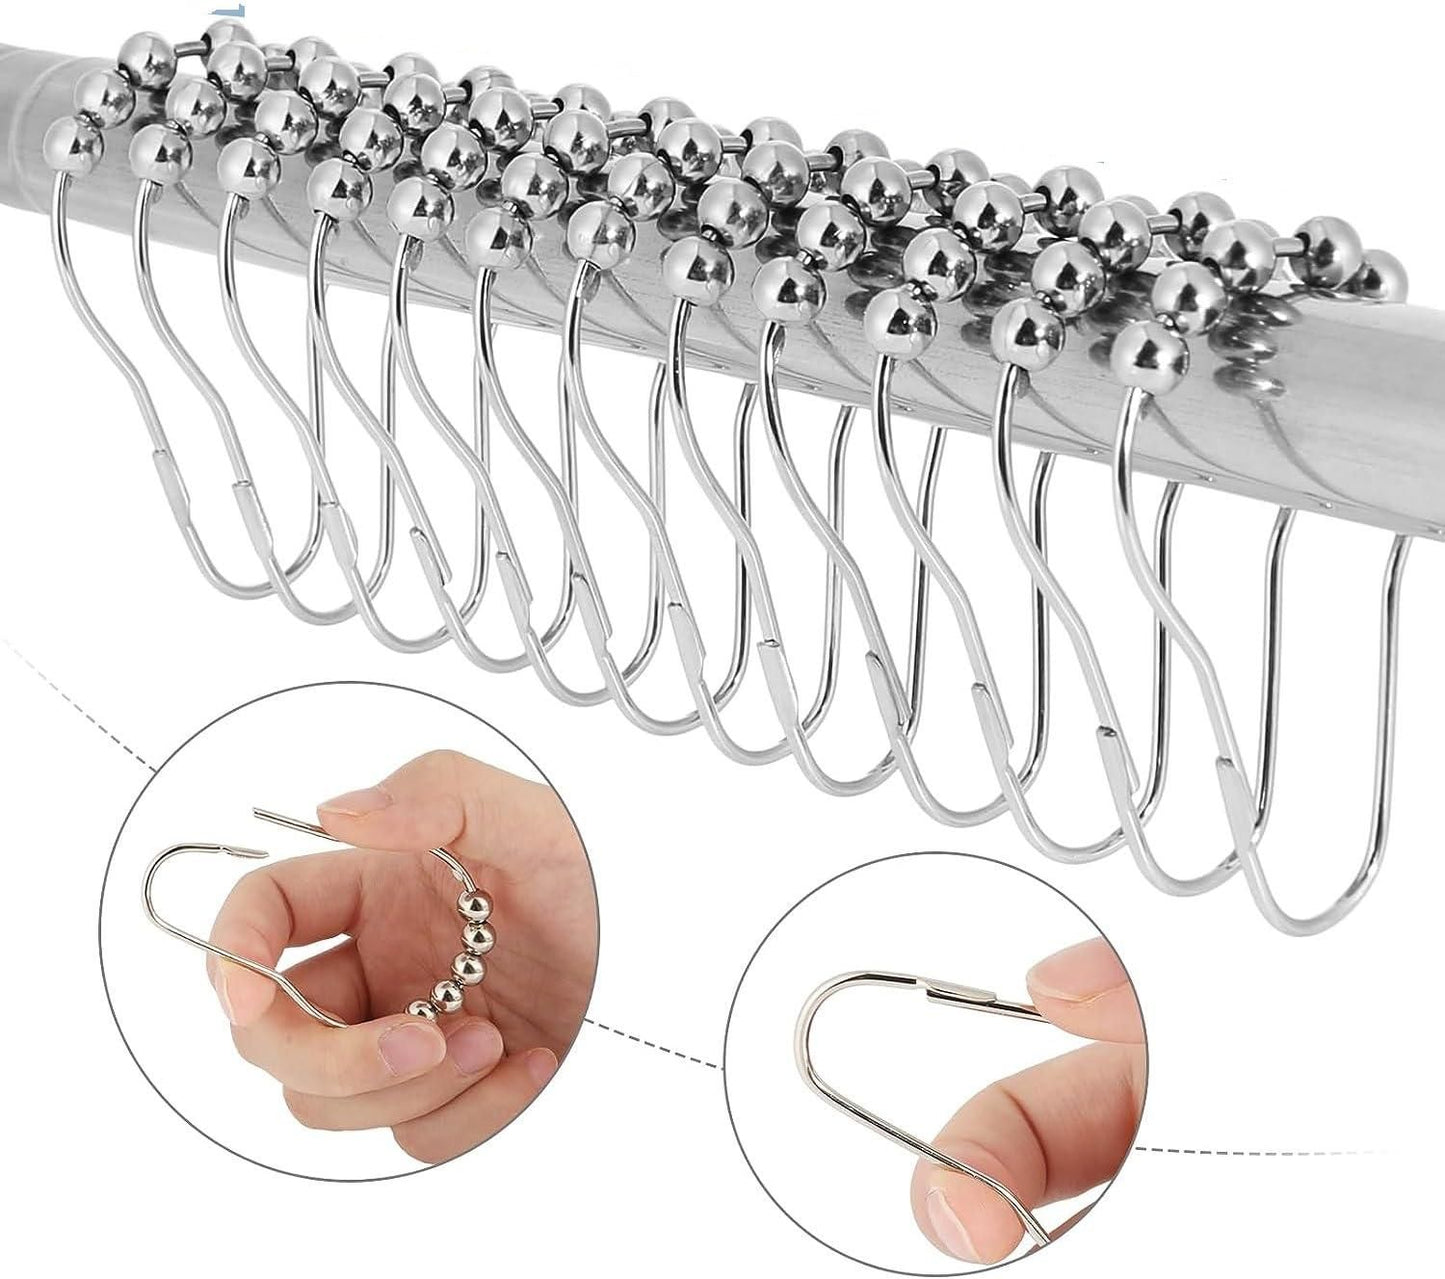 12 Piece Set Rustproof Stainless Steel Shower Curtain Rings Hooks for Bathroom, Shower Curtain Rods